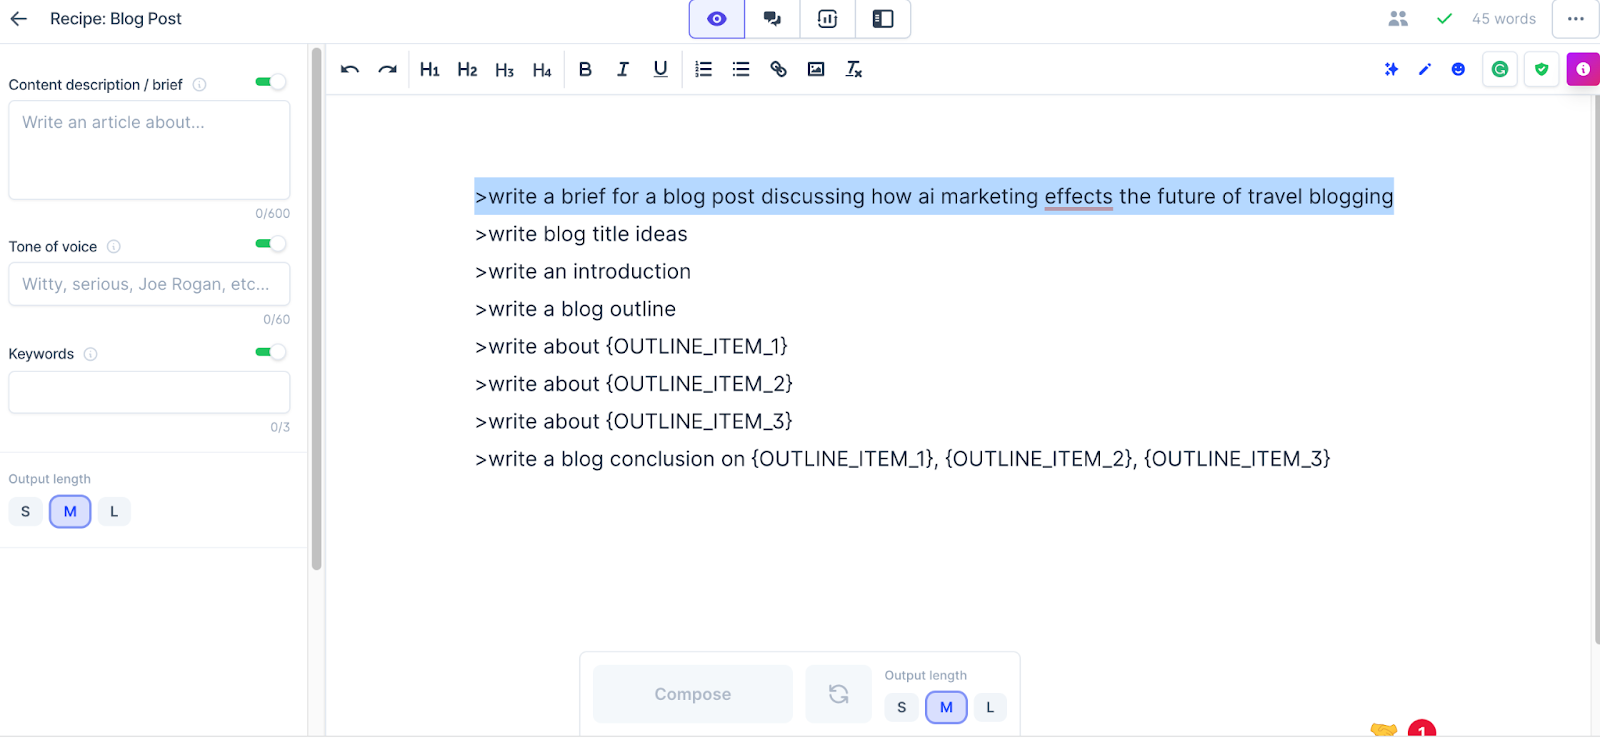 The image displays the document template on Jasper AI to help write a blog post. Inputs included in the document are commands to write a brief, blog title ideas, introduction, outline, and conclusion.